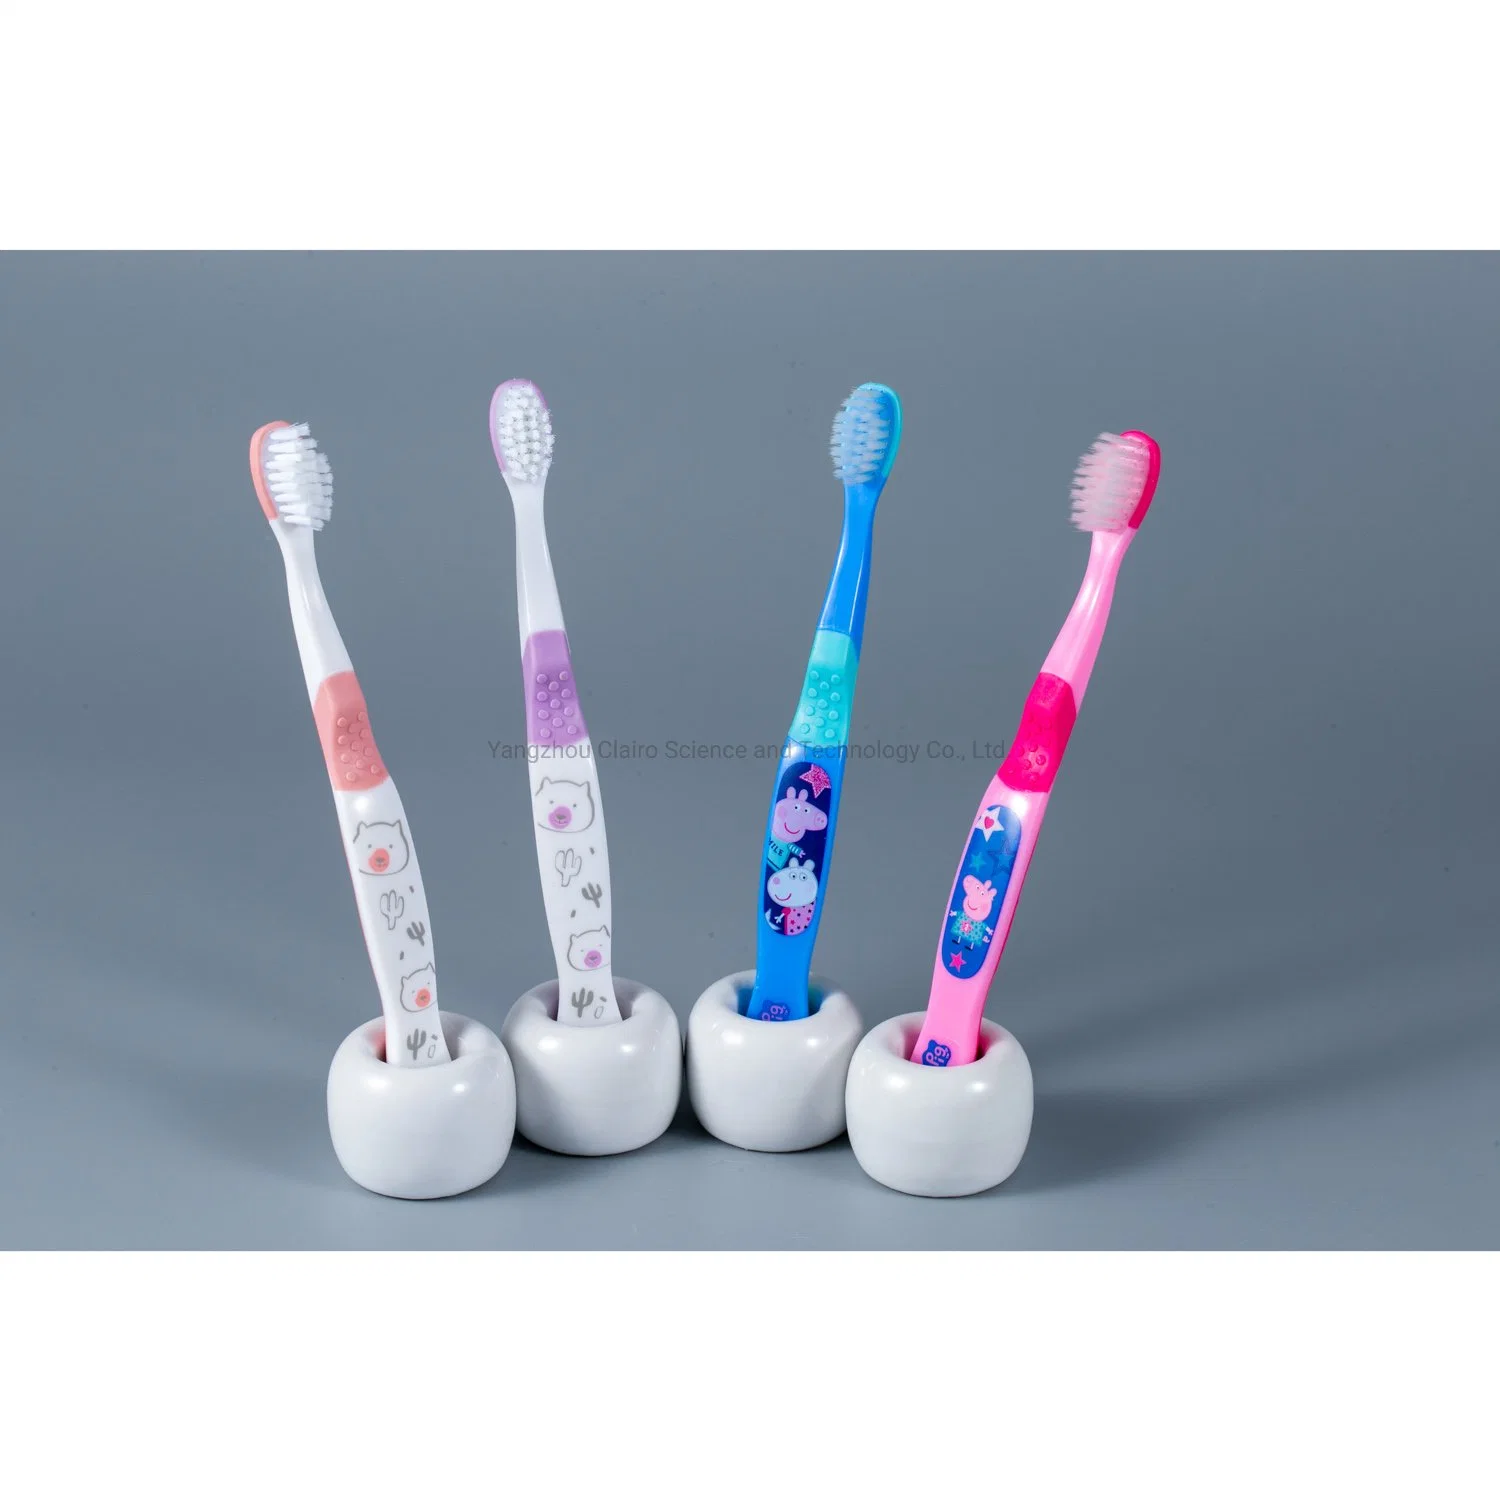 2021 OEM Thermal Transfer Kid Toothbrush with on Time Delivery